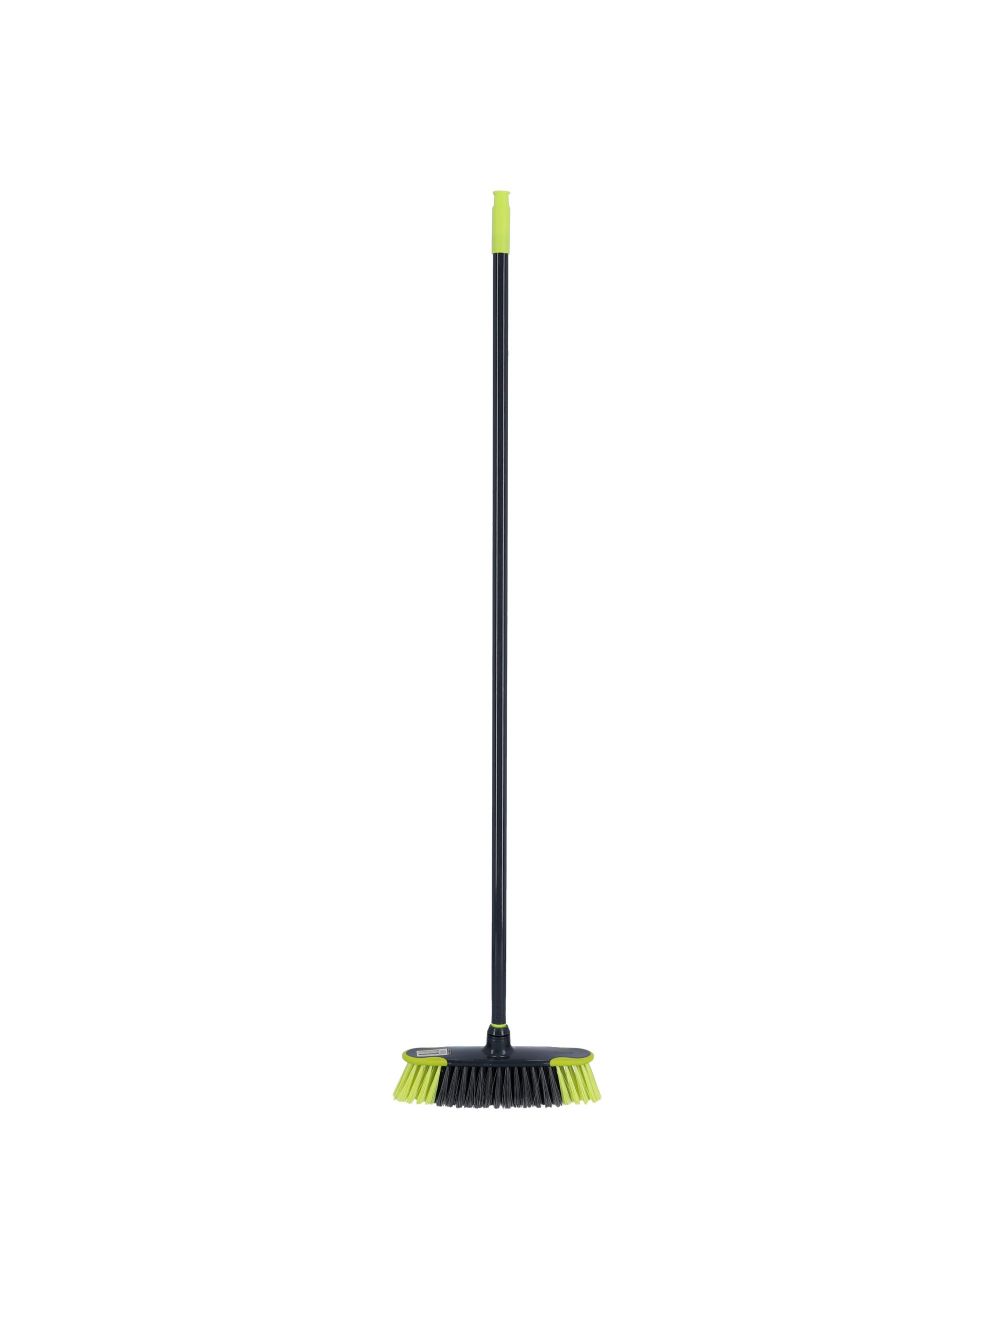 Royalford Long Floor Broom with Handle - Upright Long Handle Broom with Stiff Bristles - Multipurpose Cleaning Tool Perfect for Home or Office Use - Ideal for all Sweeping Cleaning Job